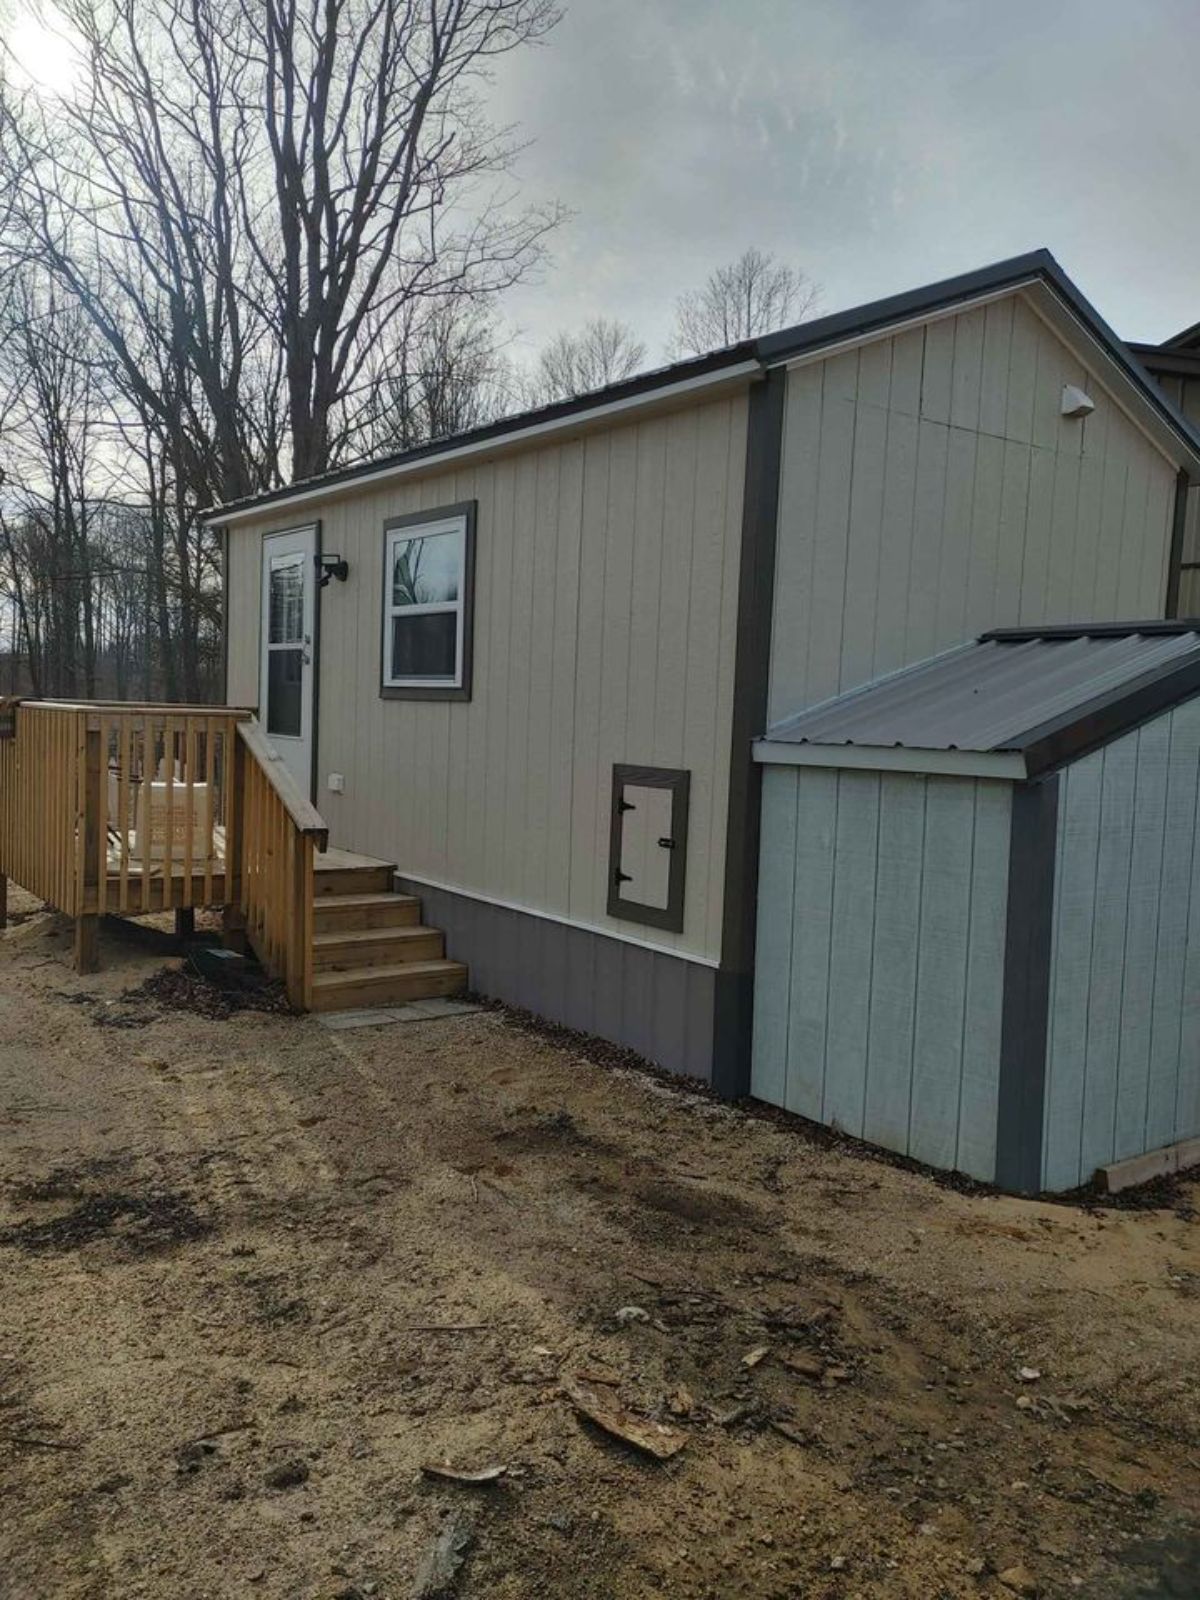 Main entrance view of 20’ fully furnished tiny home